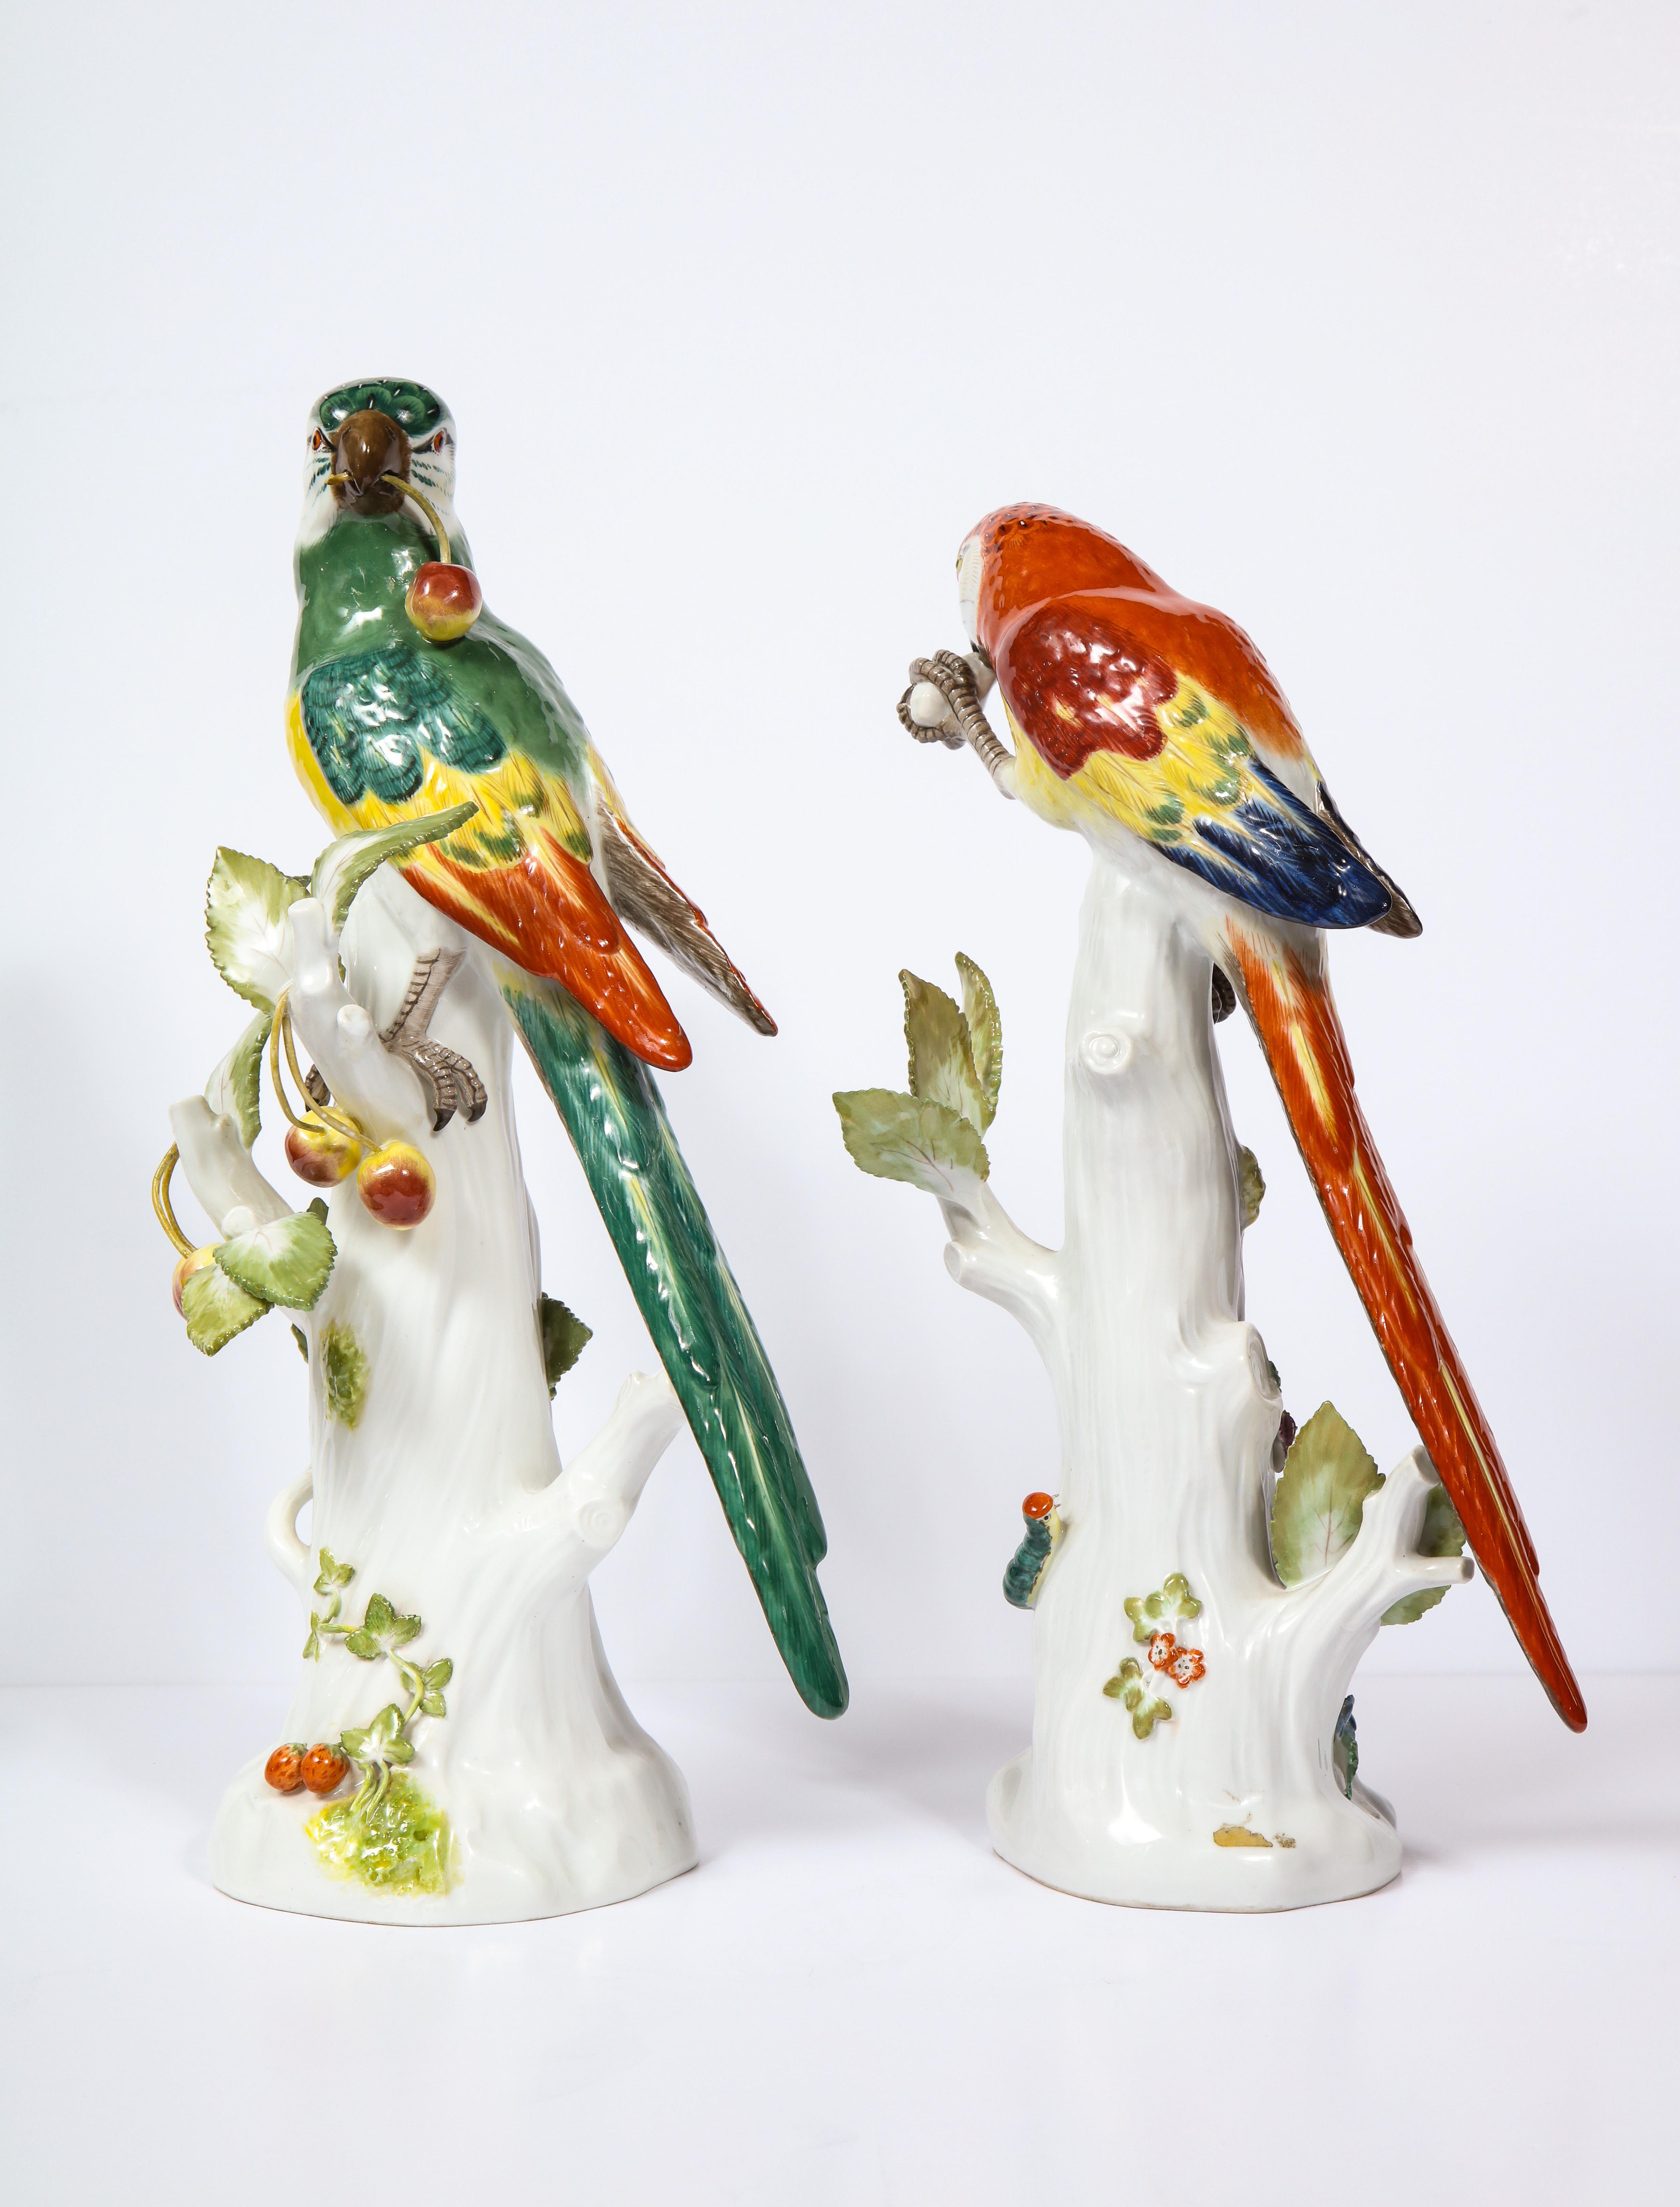 German Pair of Meissen Porcelain Figures of Parrots with Cherries, Insects and Flowers